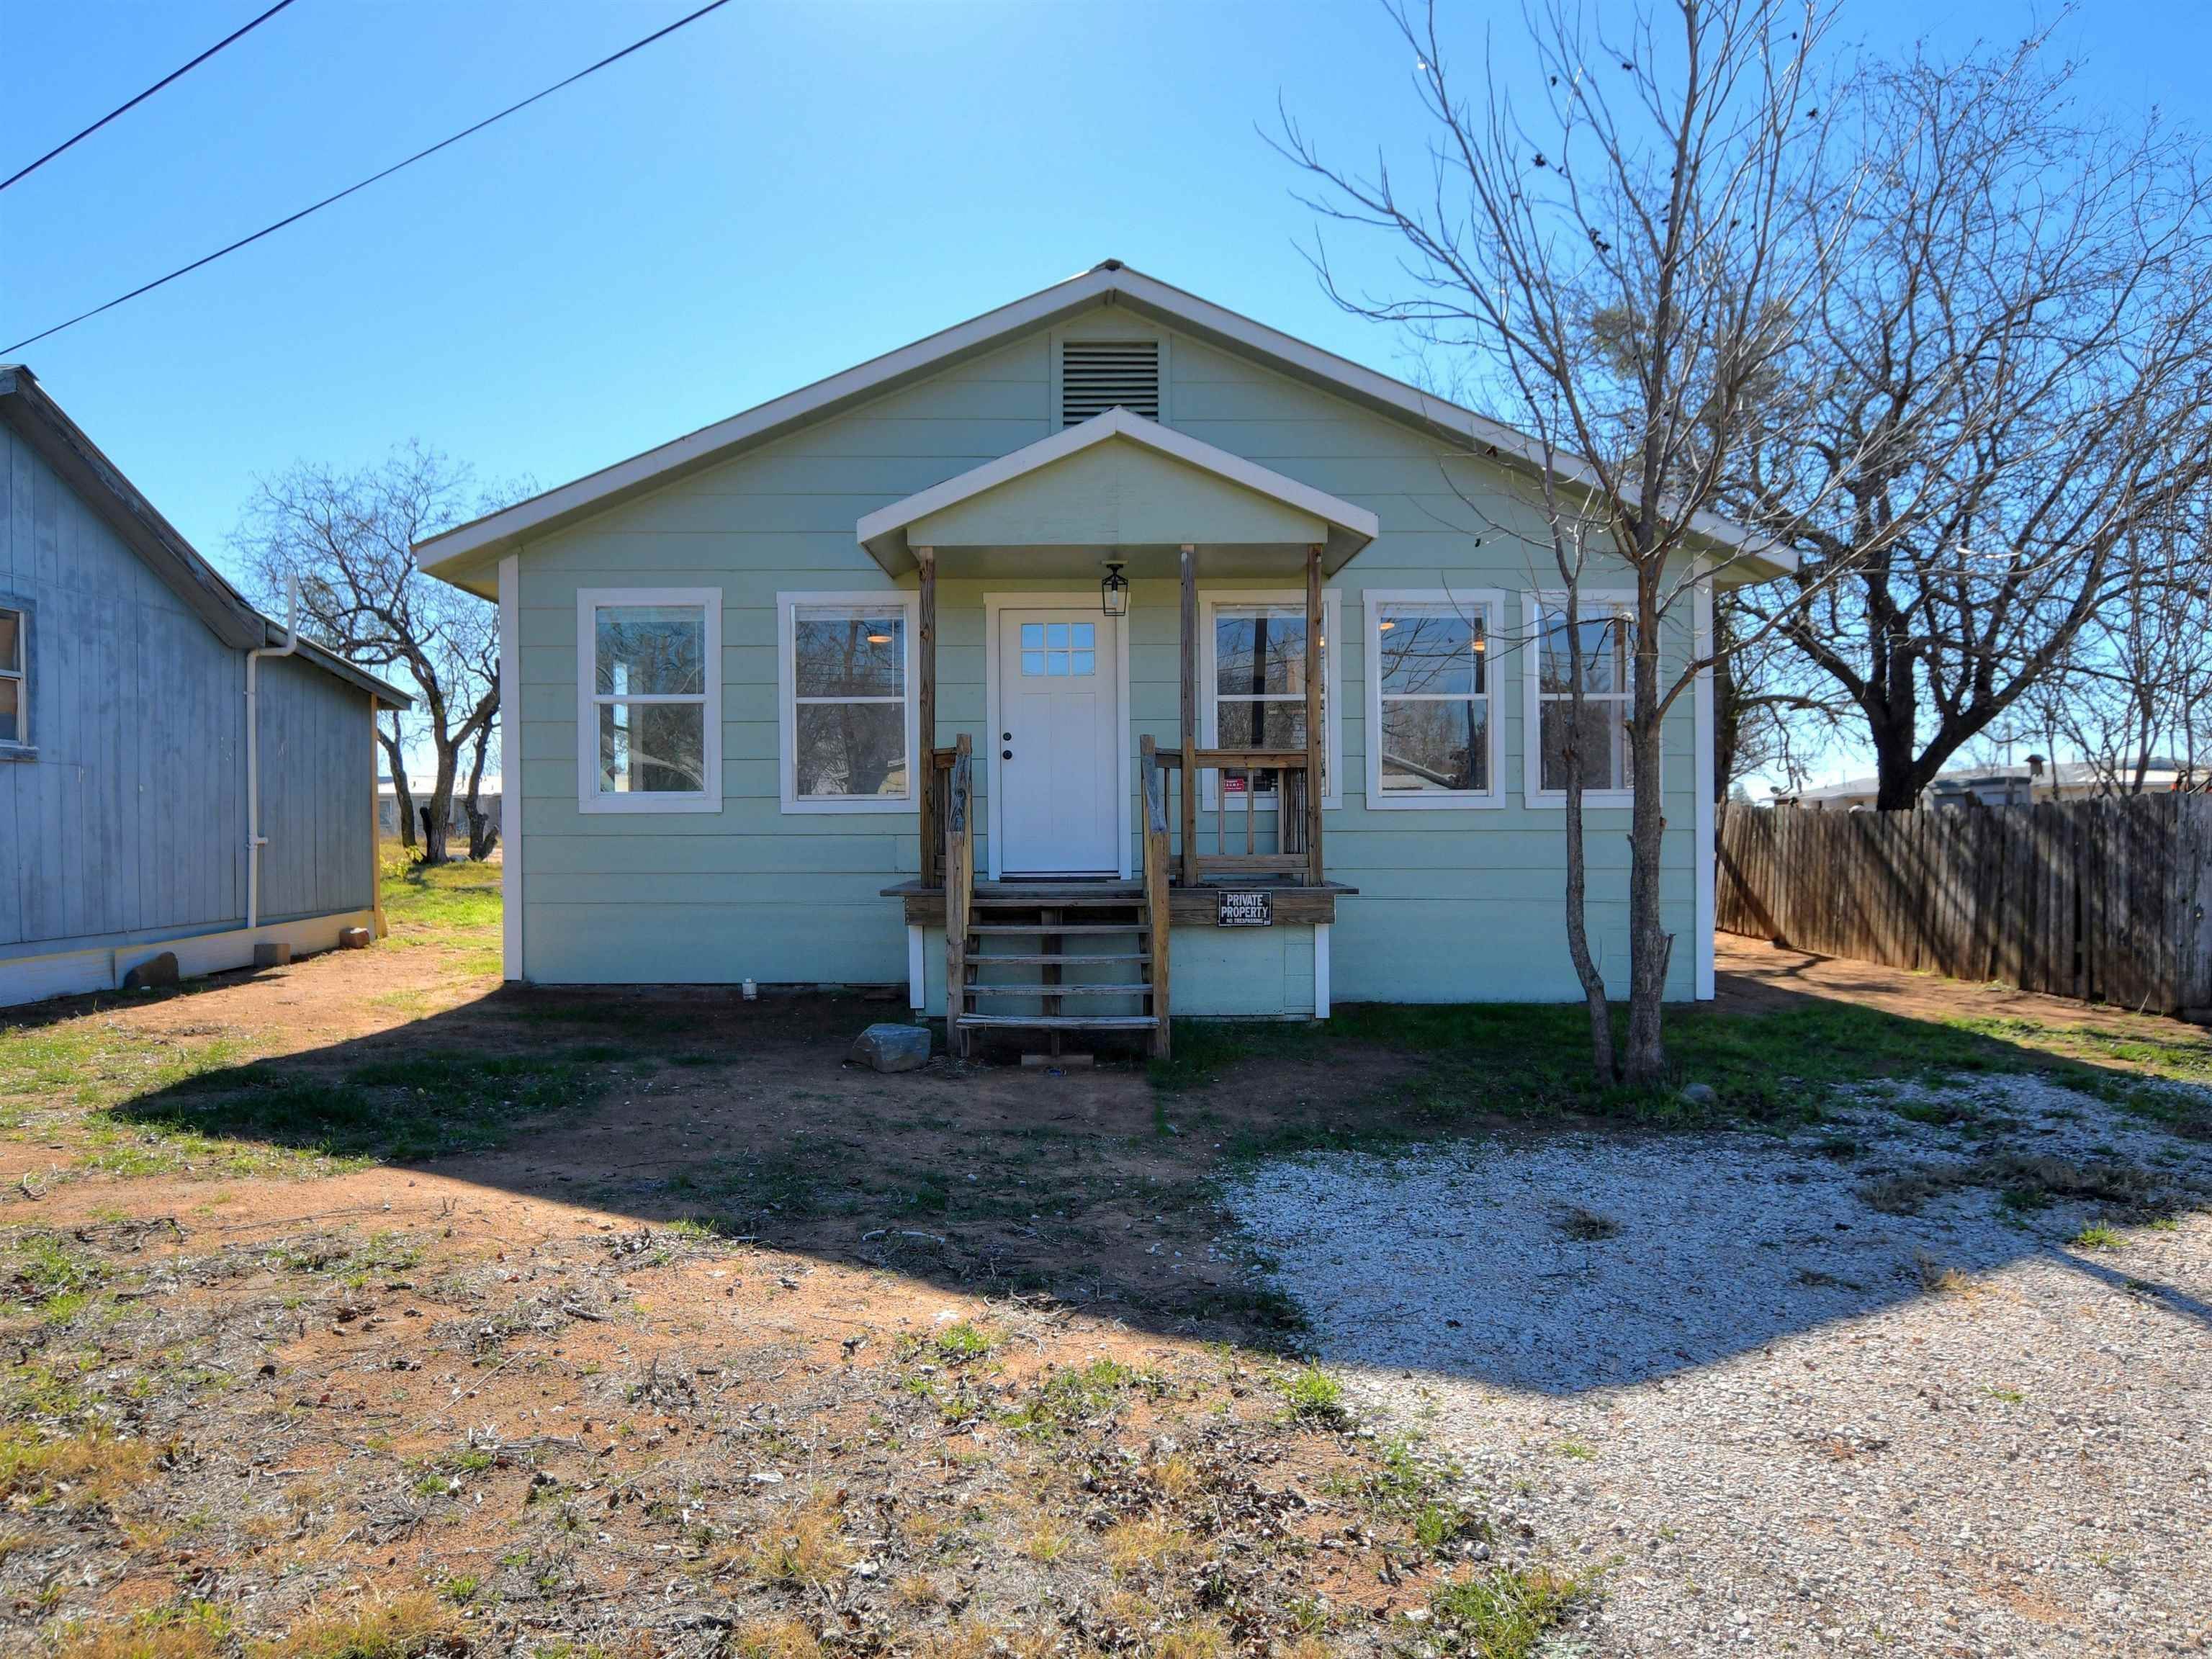 Property for Sale at 104 W Houston Llano, Texas 78643 United States